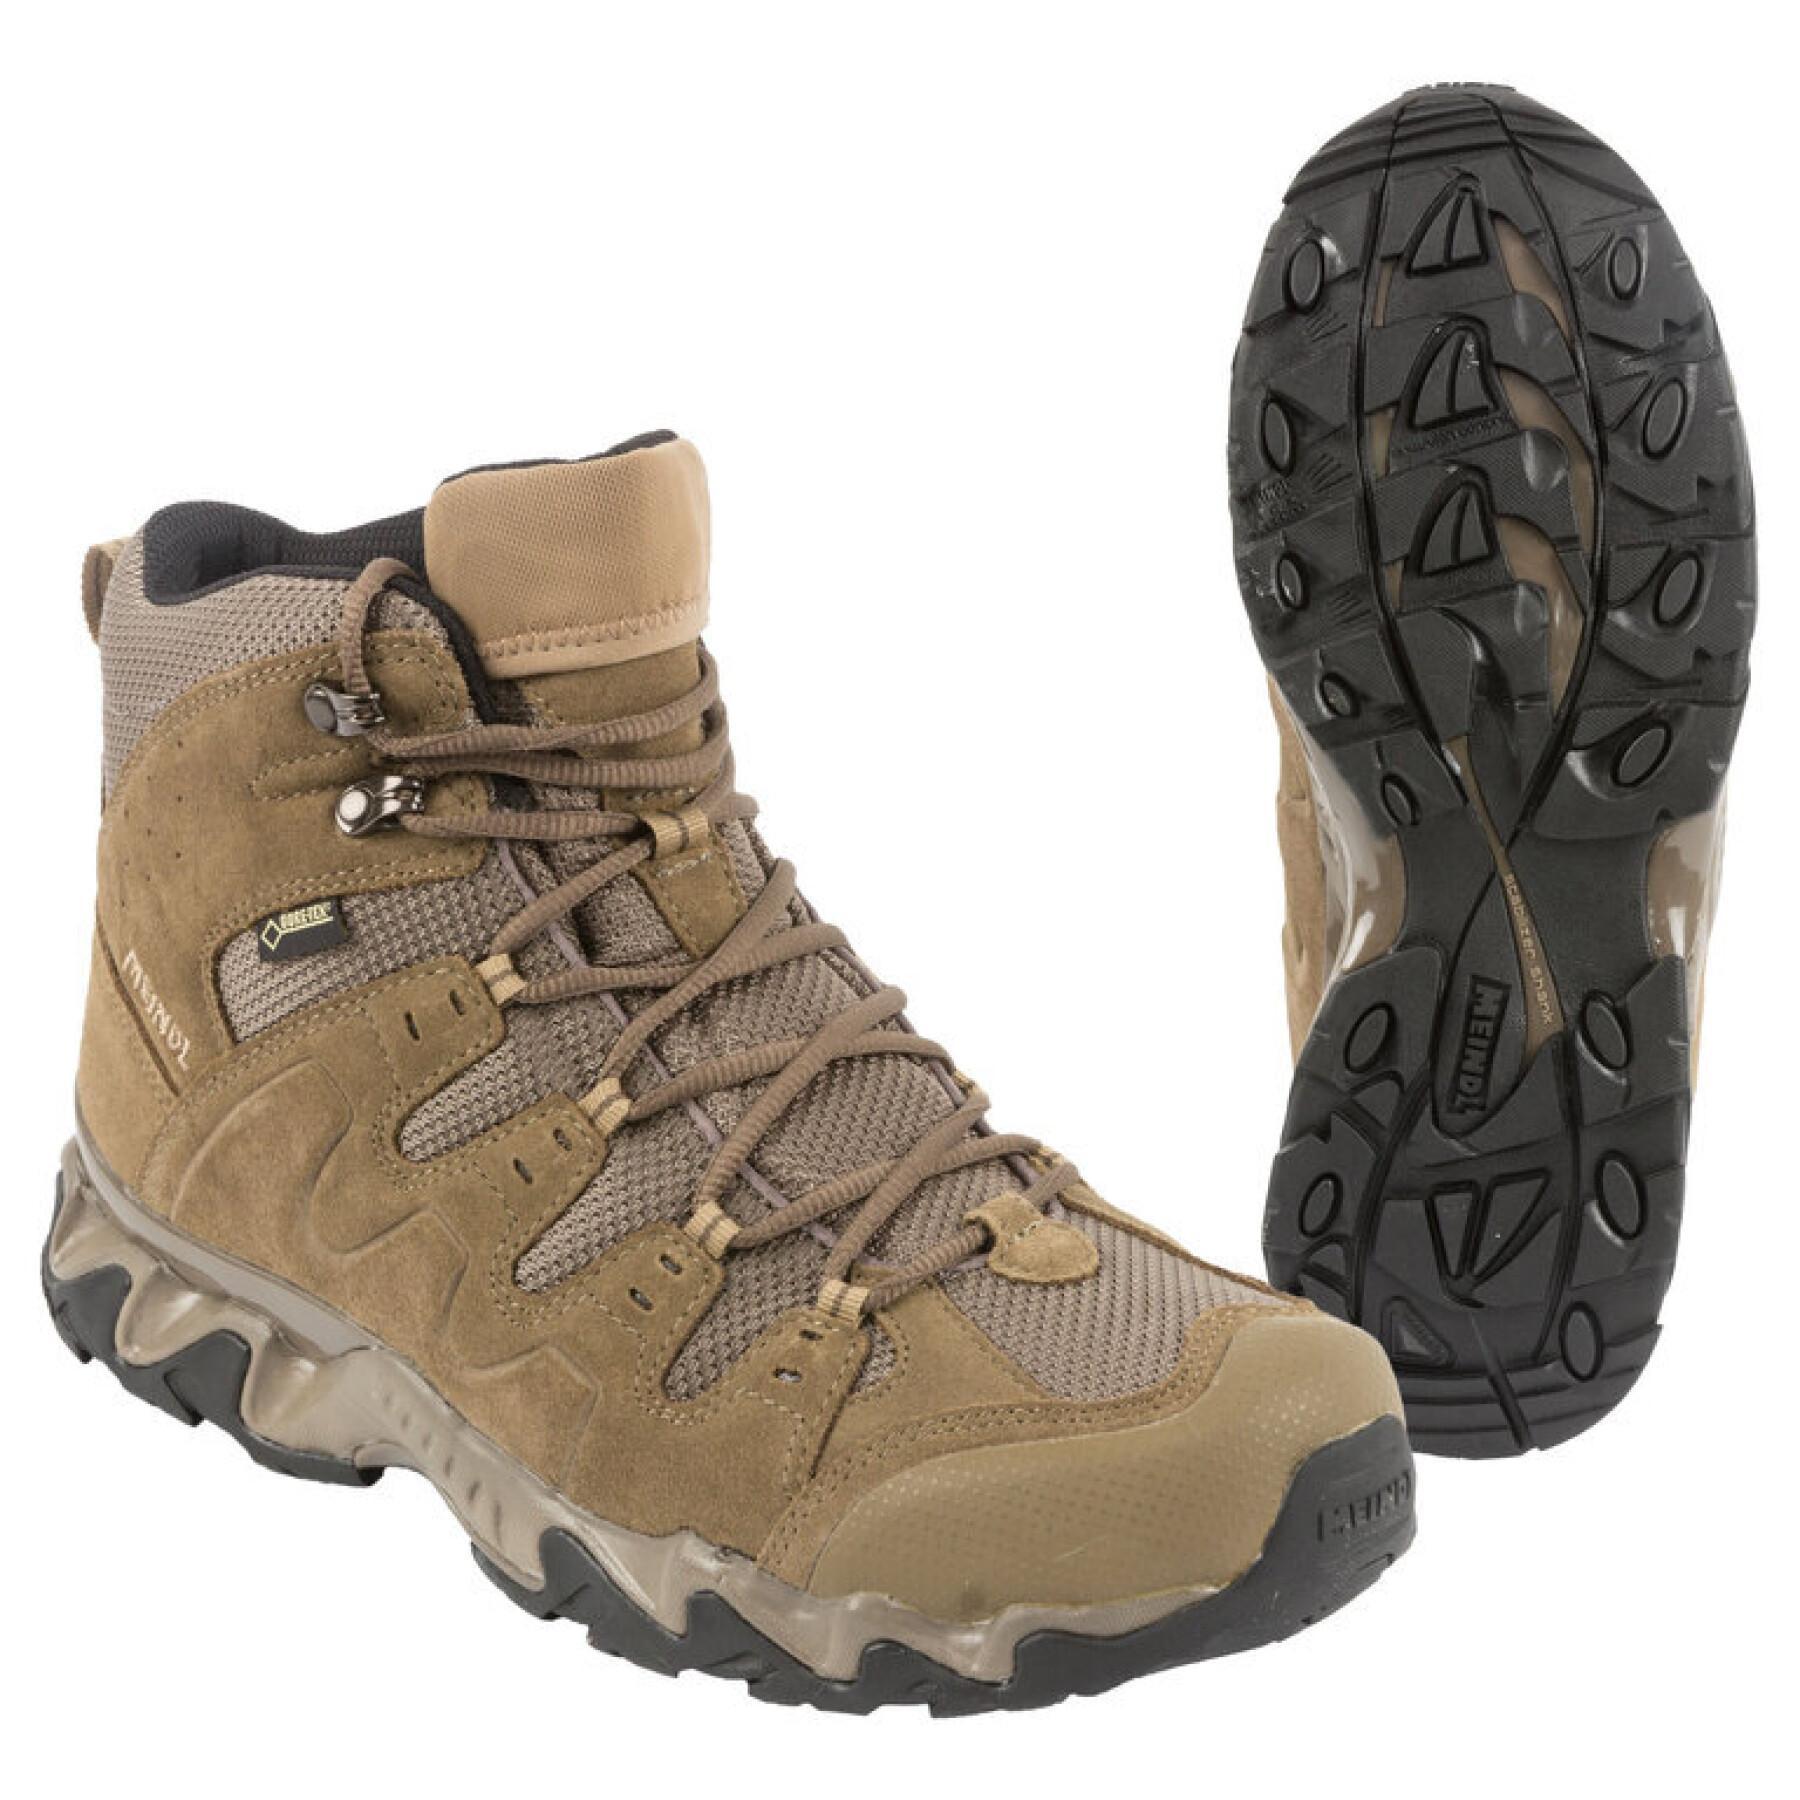 Hiking shoes Meindl Provider PRO GTX